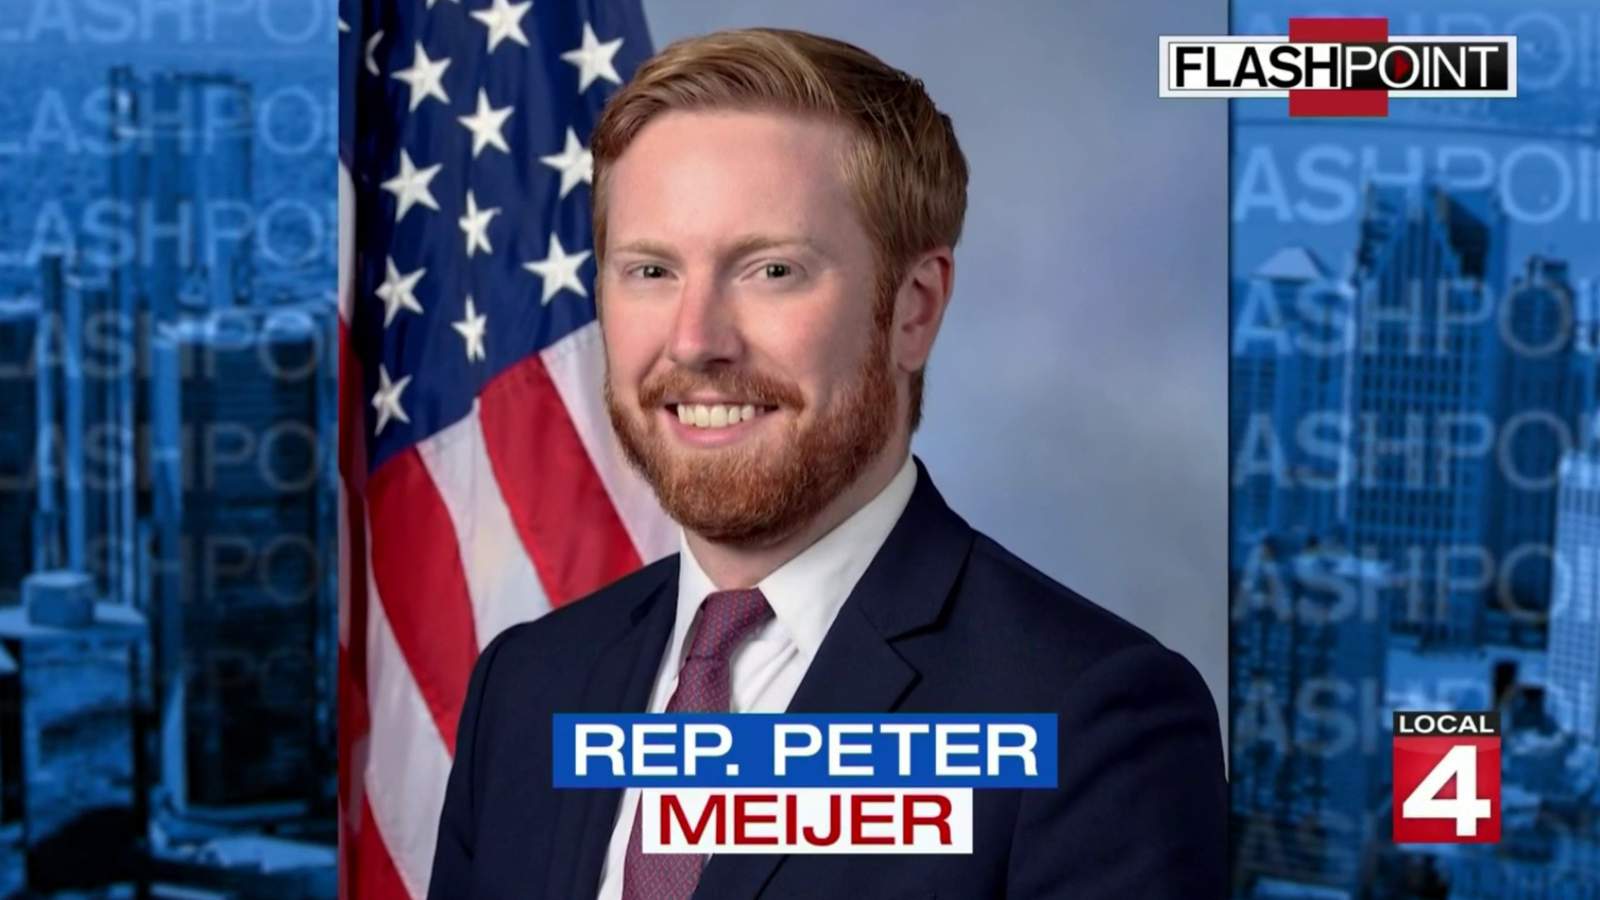 Flashpoint recap: GOP Rep. Peter Meijer weighs in on COVID relief and infrastructure; Michigan AG discusses issues facing her office